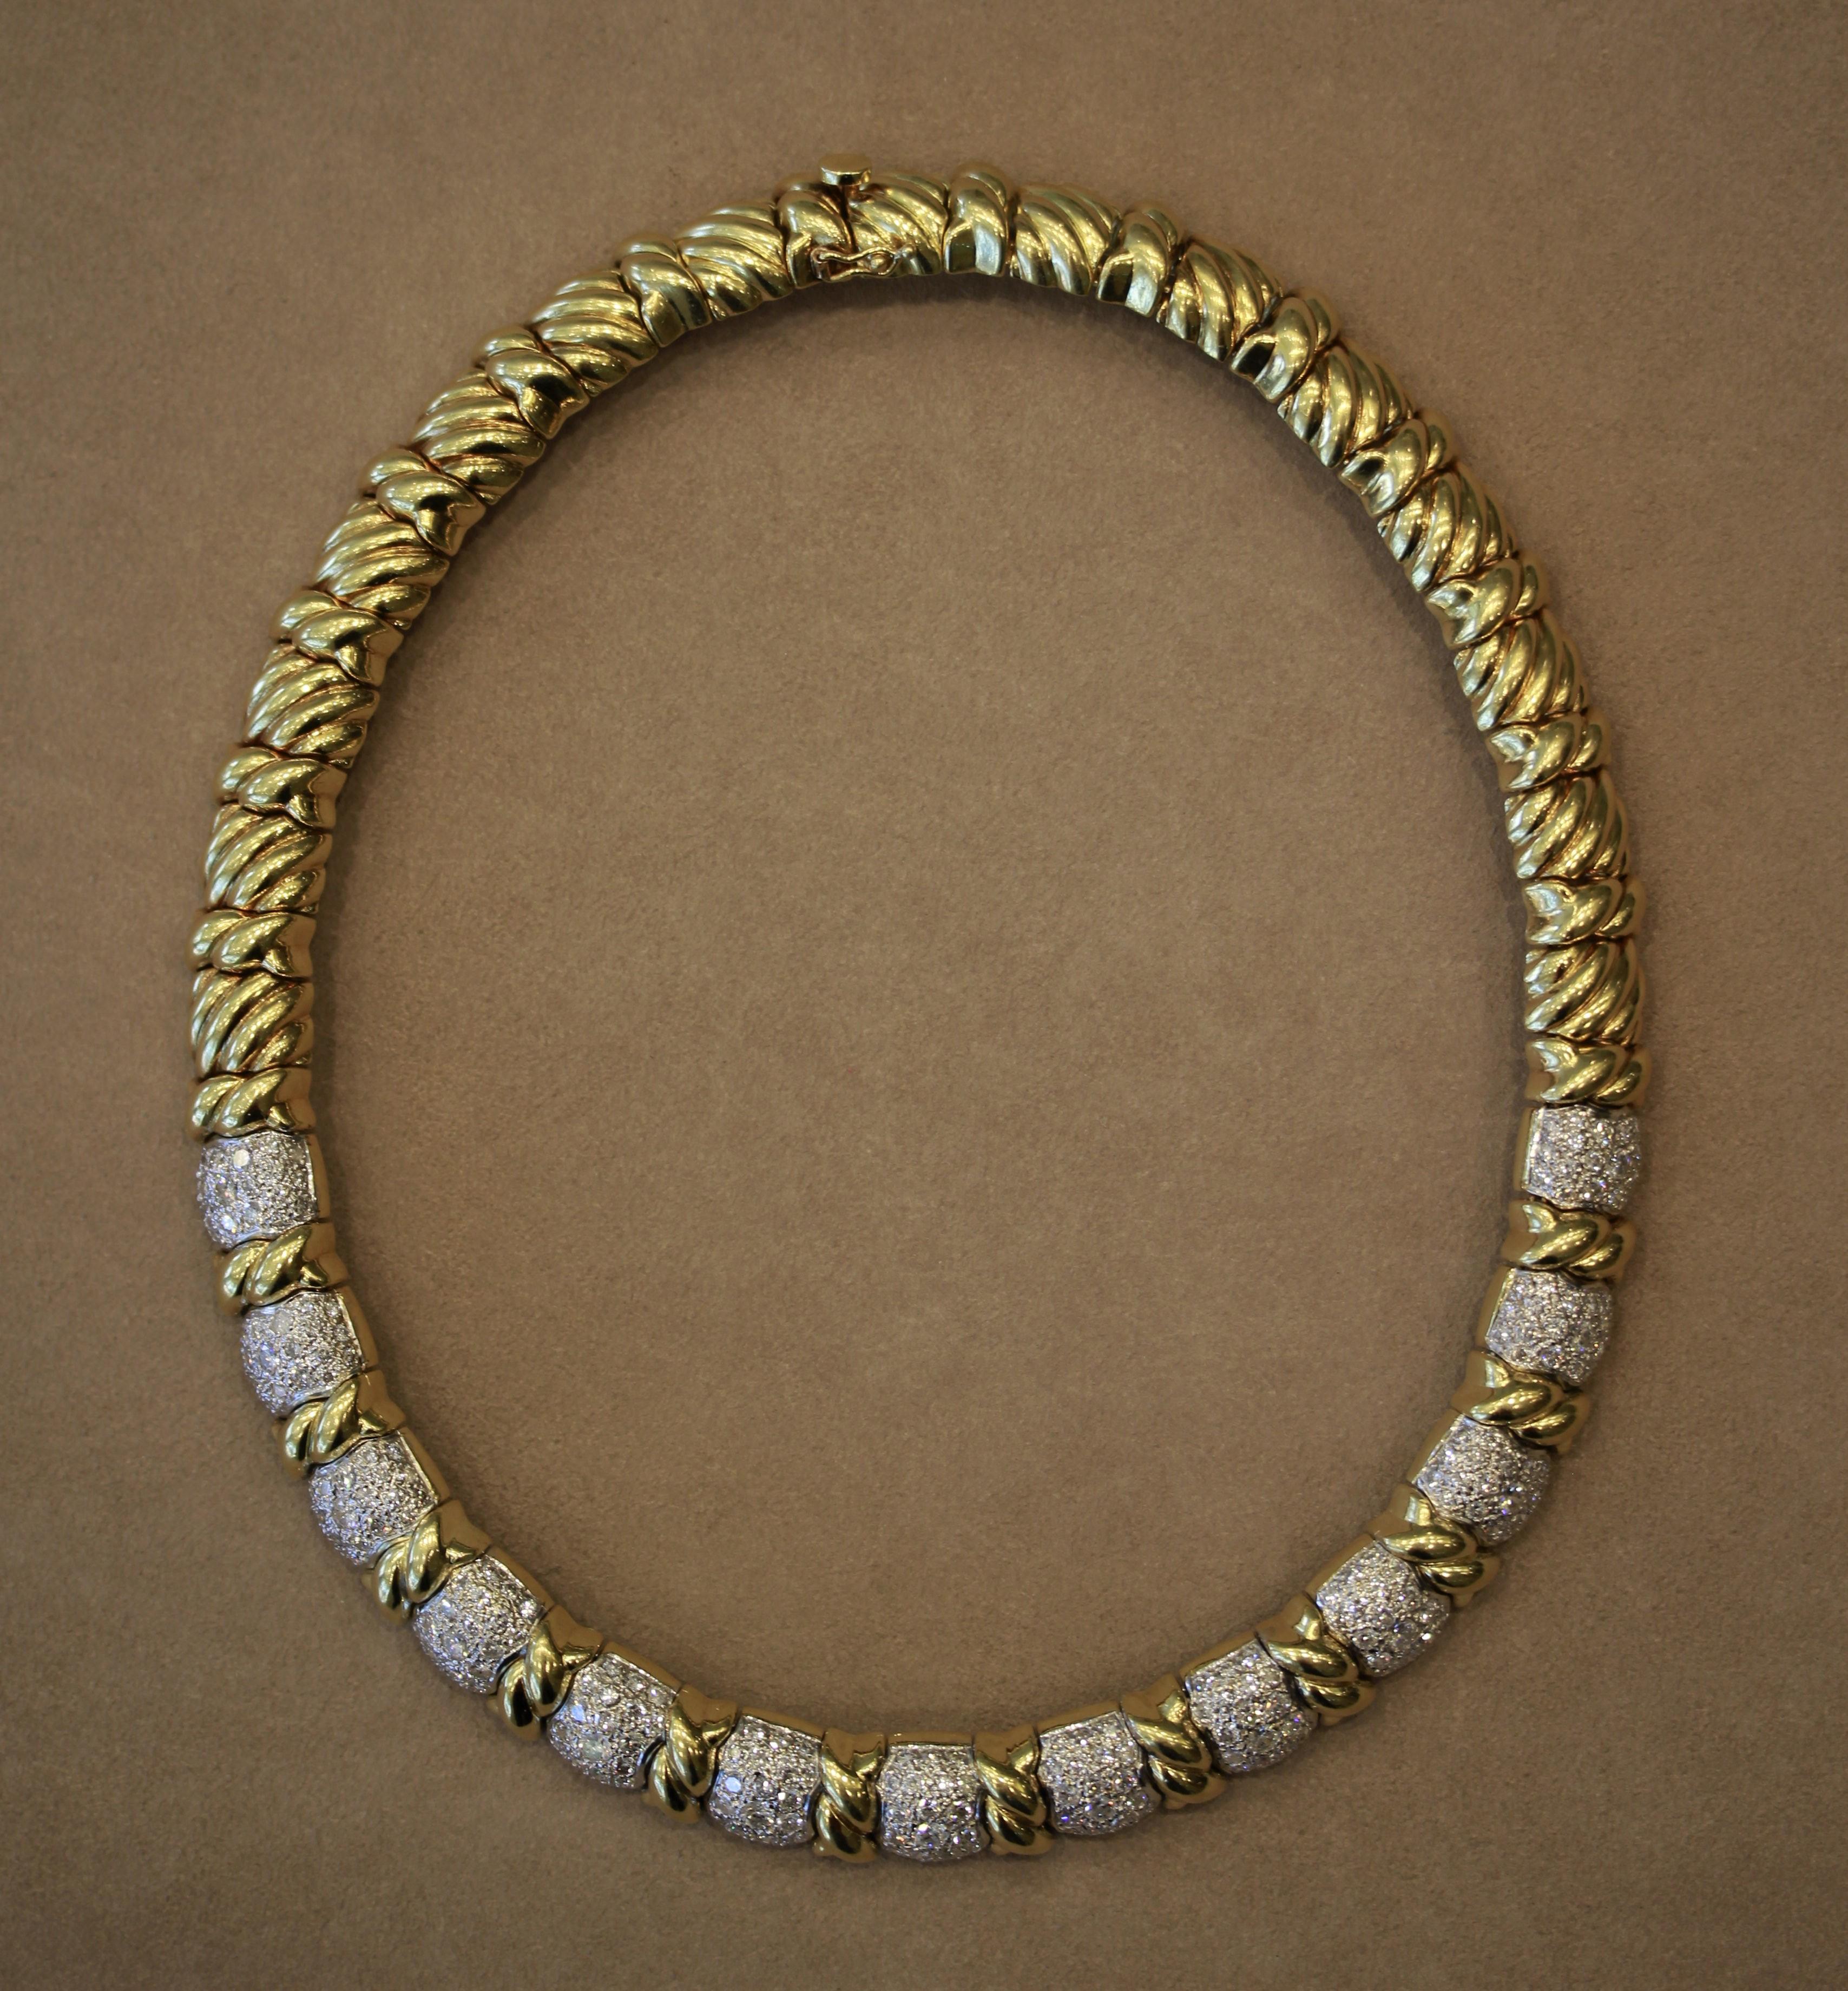 A statement piece, this necklace made in 18k yellow gold features 12.20 carats or round brilliant cut diamonds. Each link has some movement from each other allowing the necklace to lay flat on the neckline with comfort. The necklace weighs a total